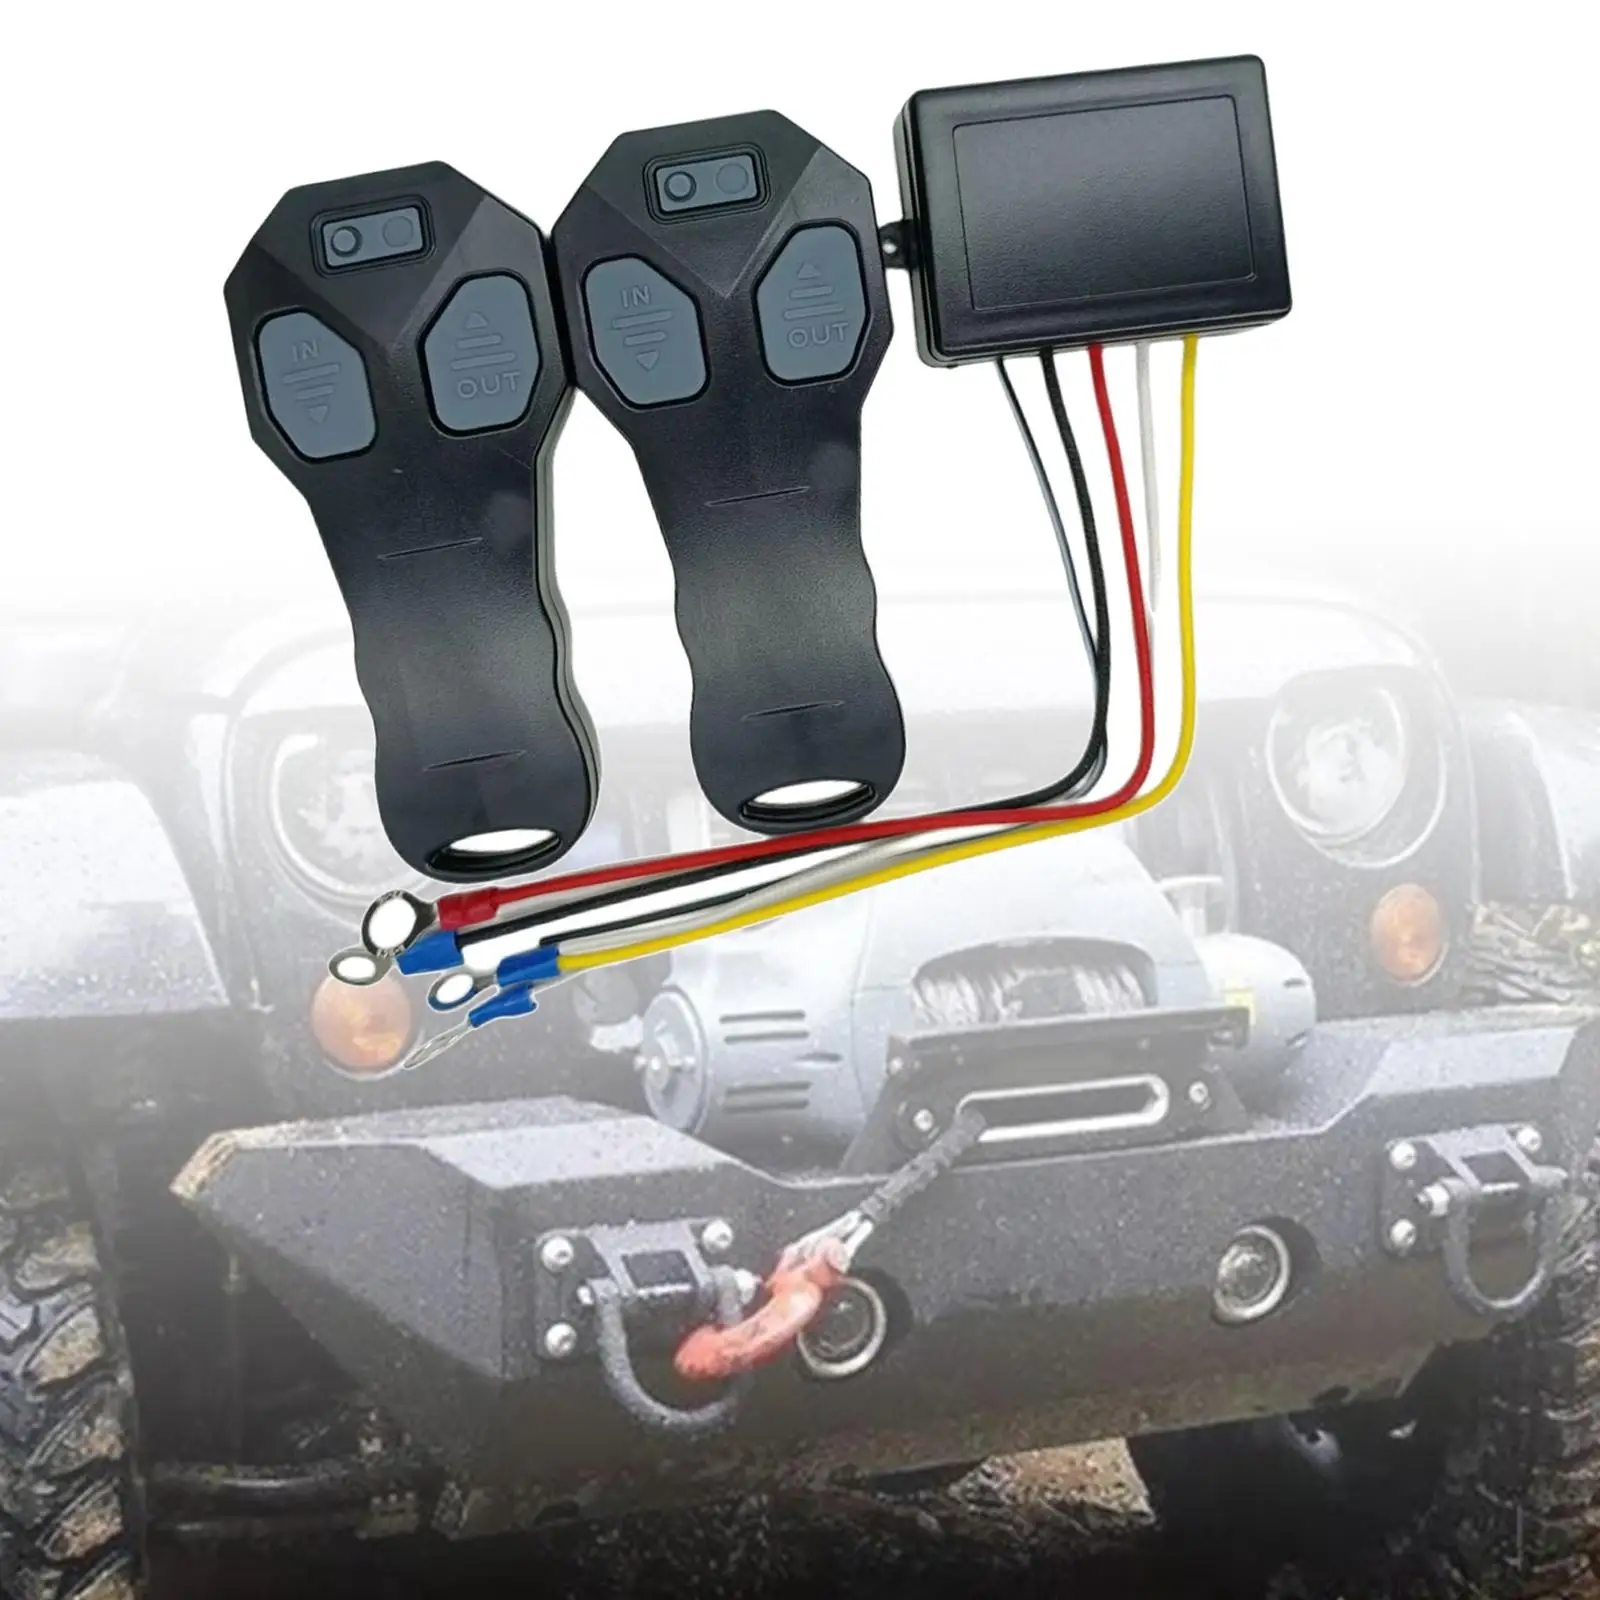 Wireless Winch Remote Control Kit Handset Switch for Car SUV Truck